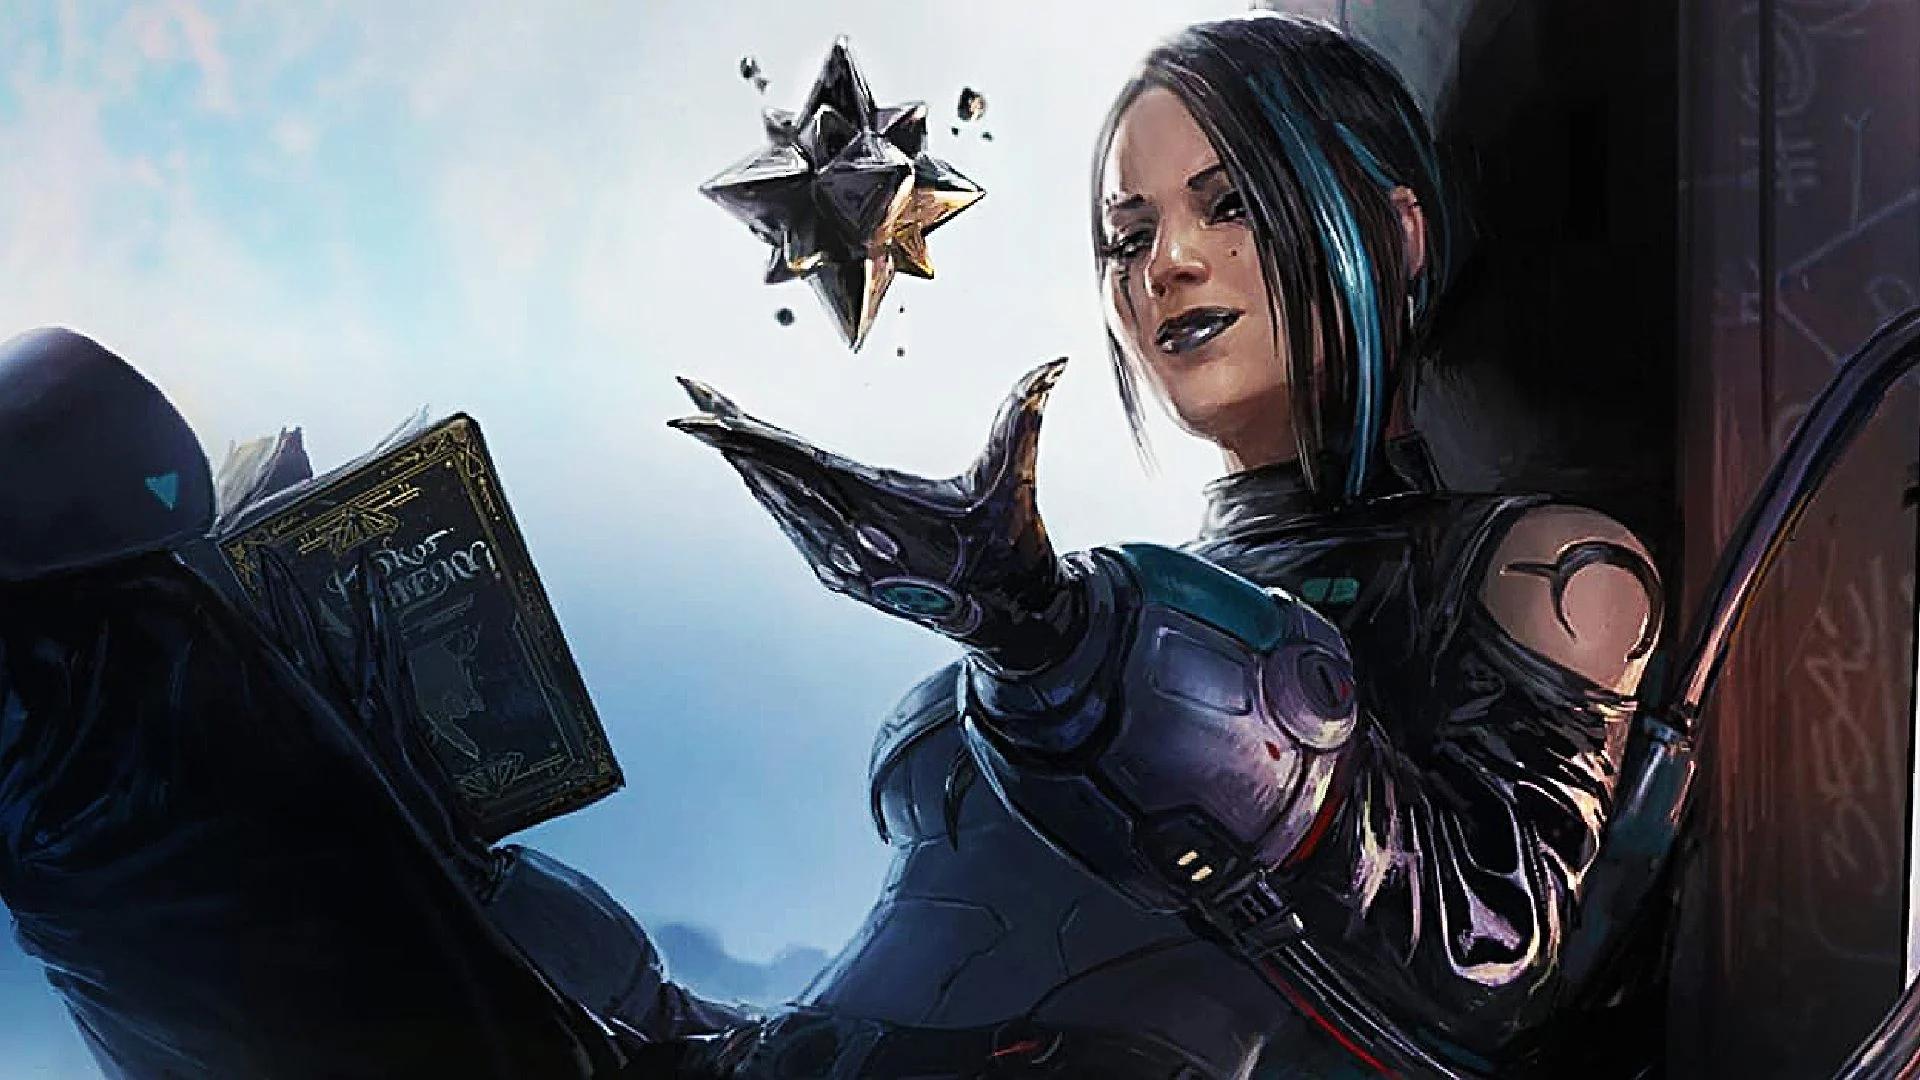 Catalyst concept art shows the Apex Legends here creating a crystal from ferrofluid while reading a book